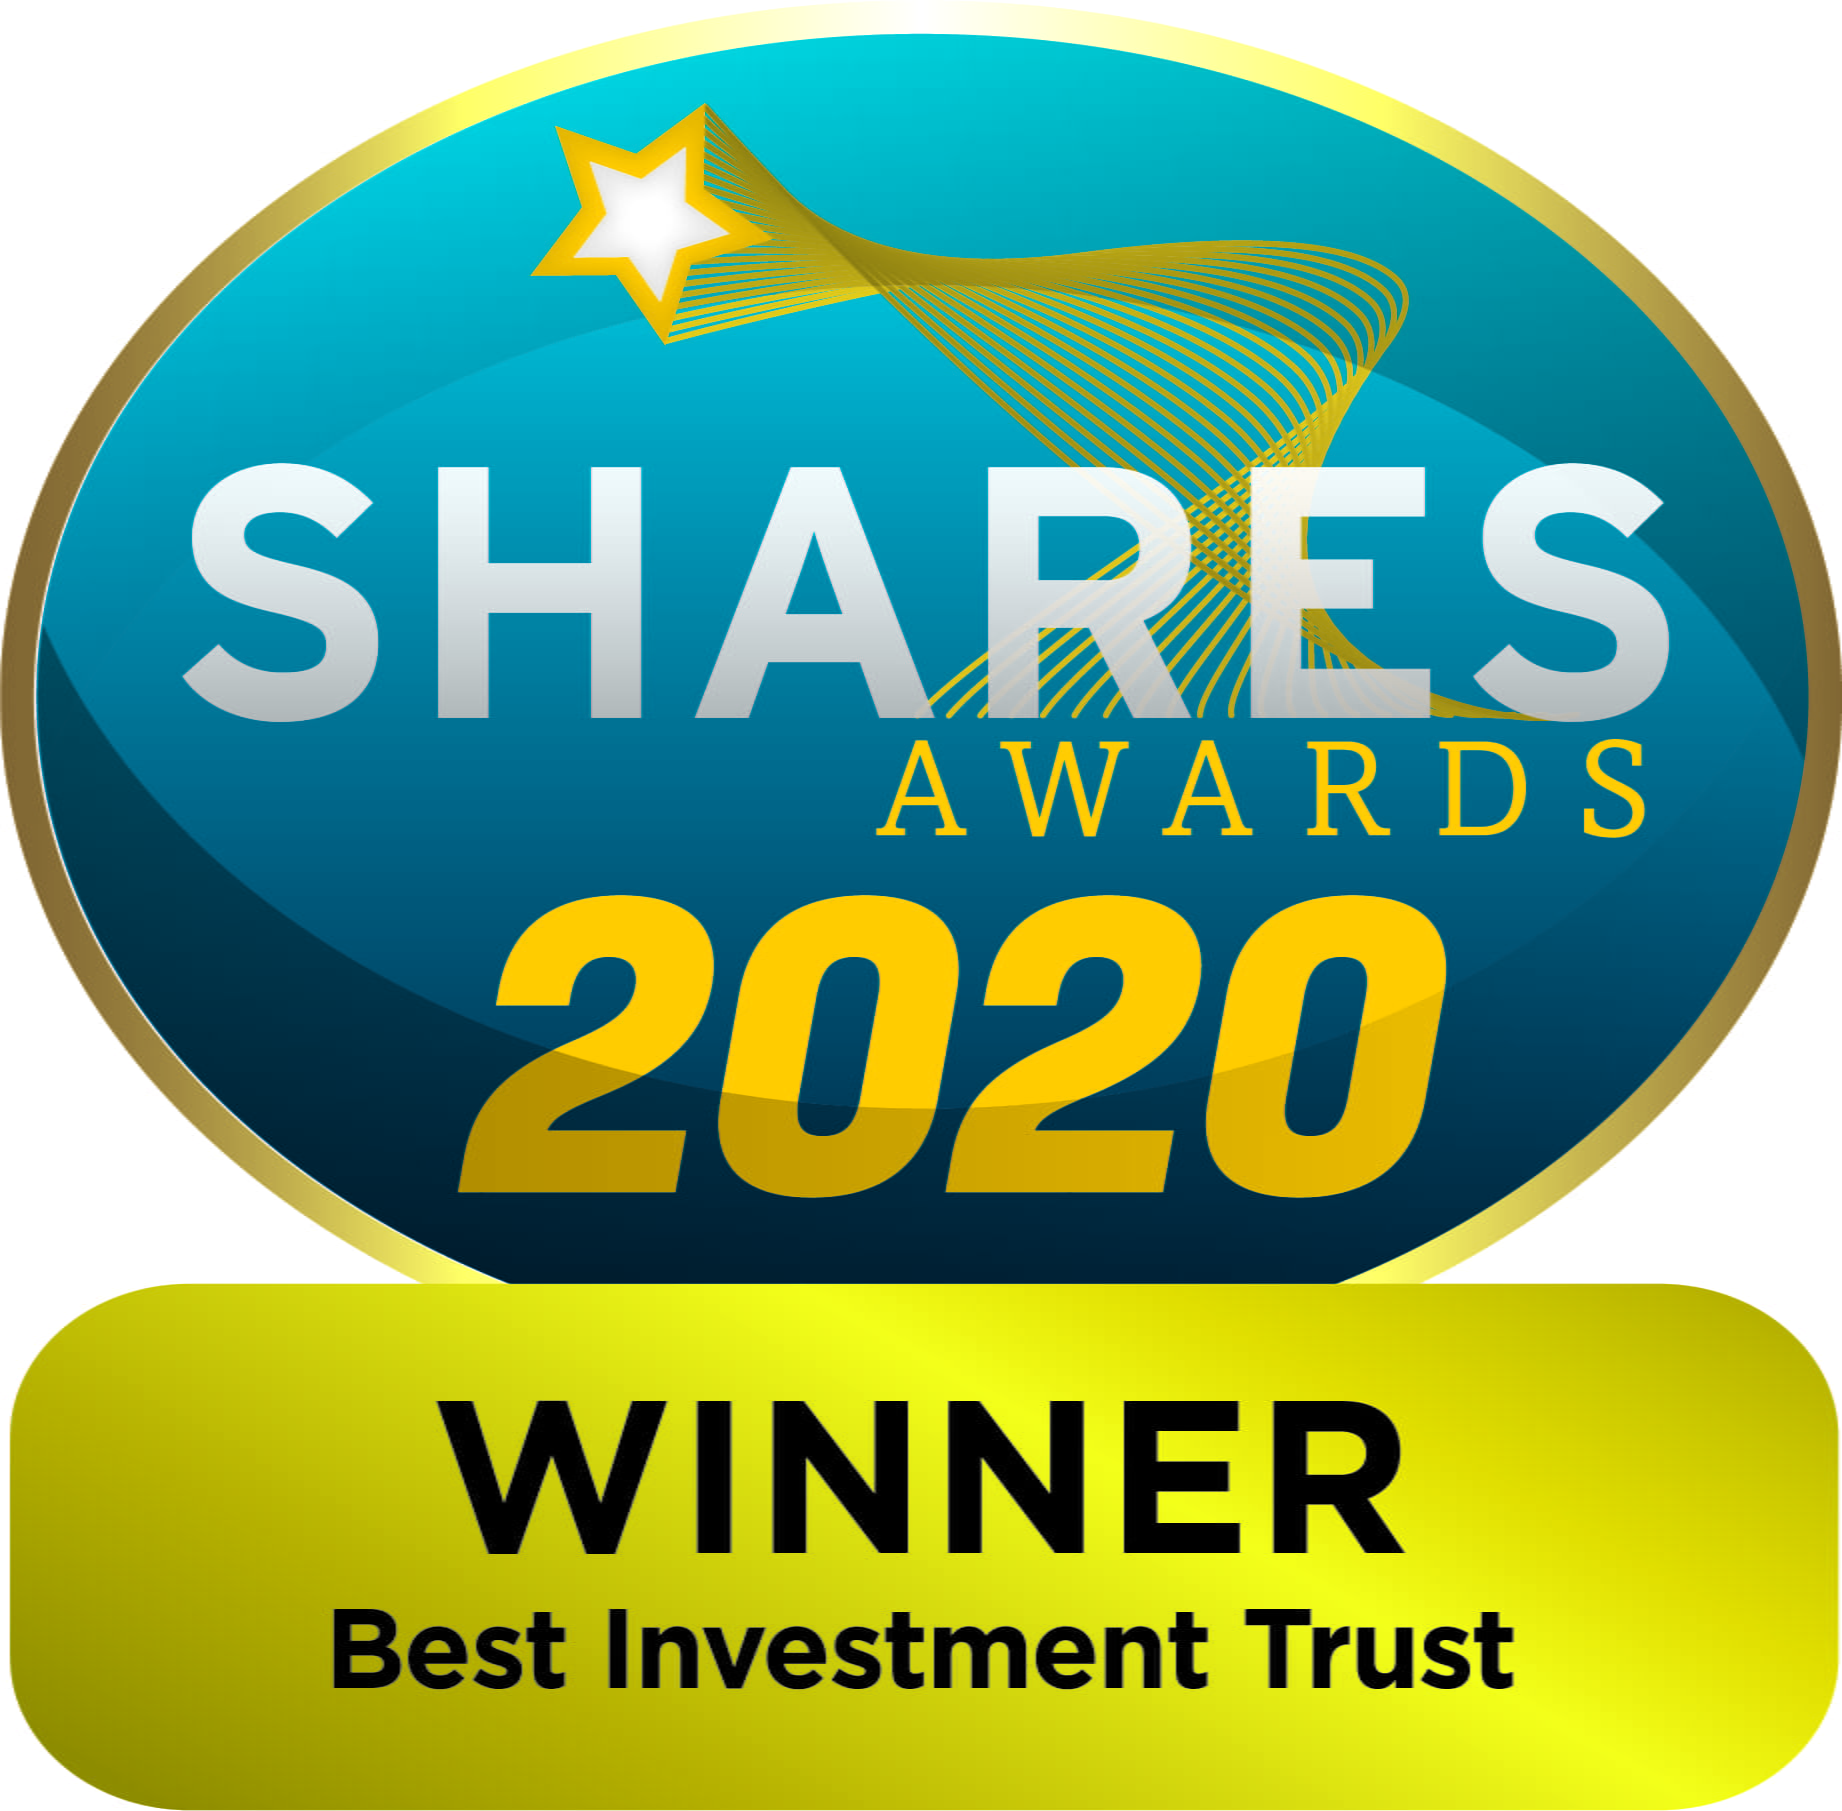 Shares Awards 2020 – Best Investment Trust